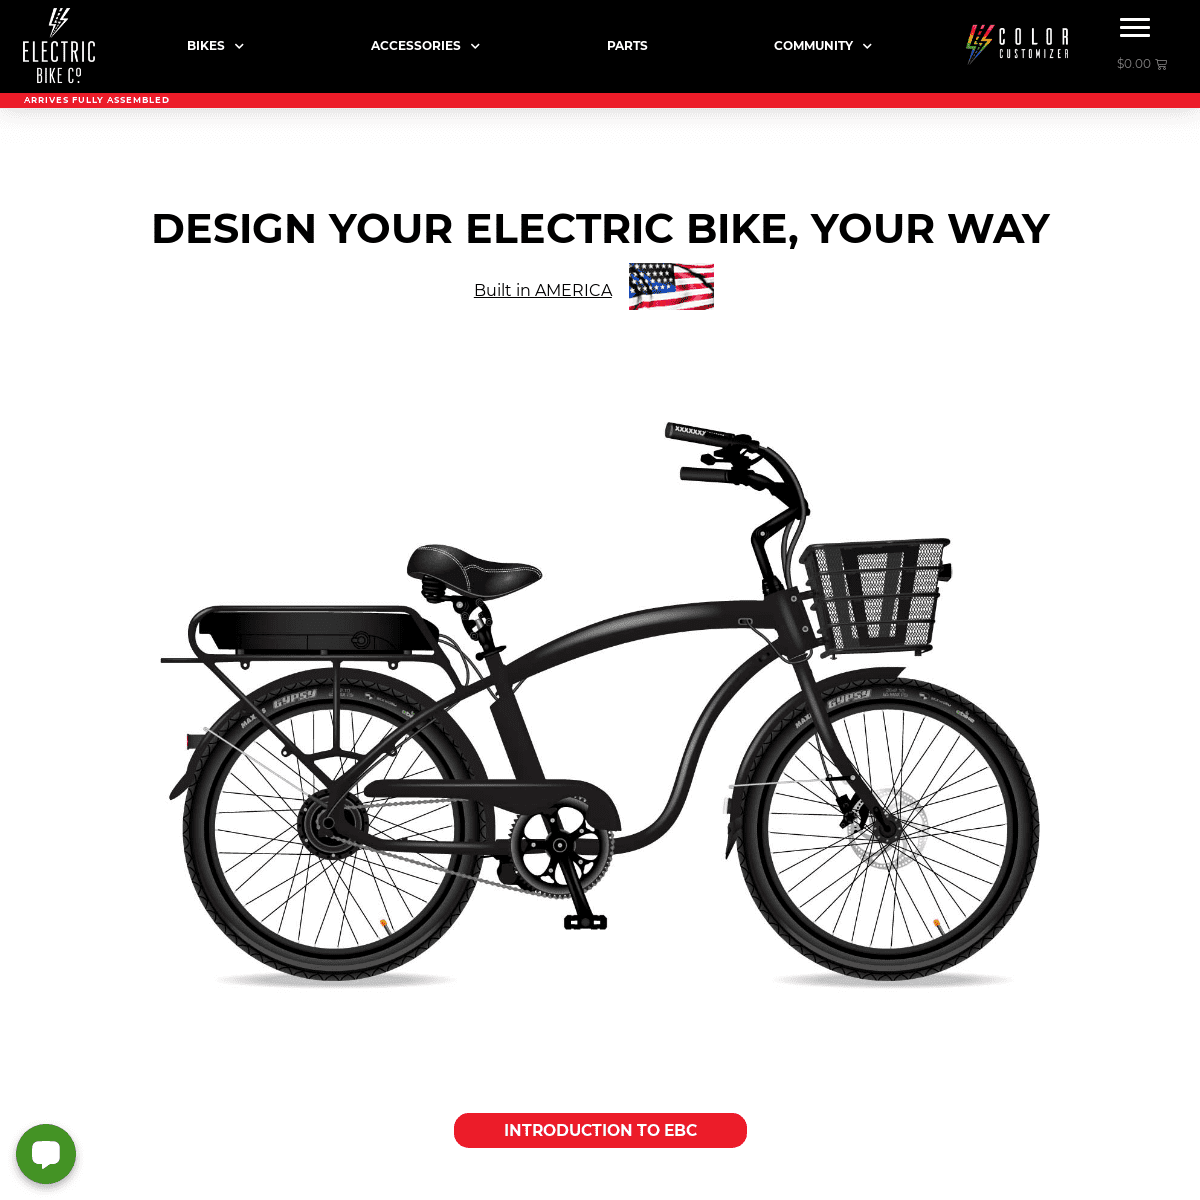 A complete backup of electricbikecompany.com